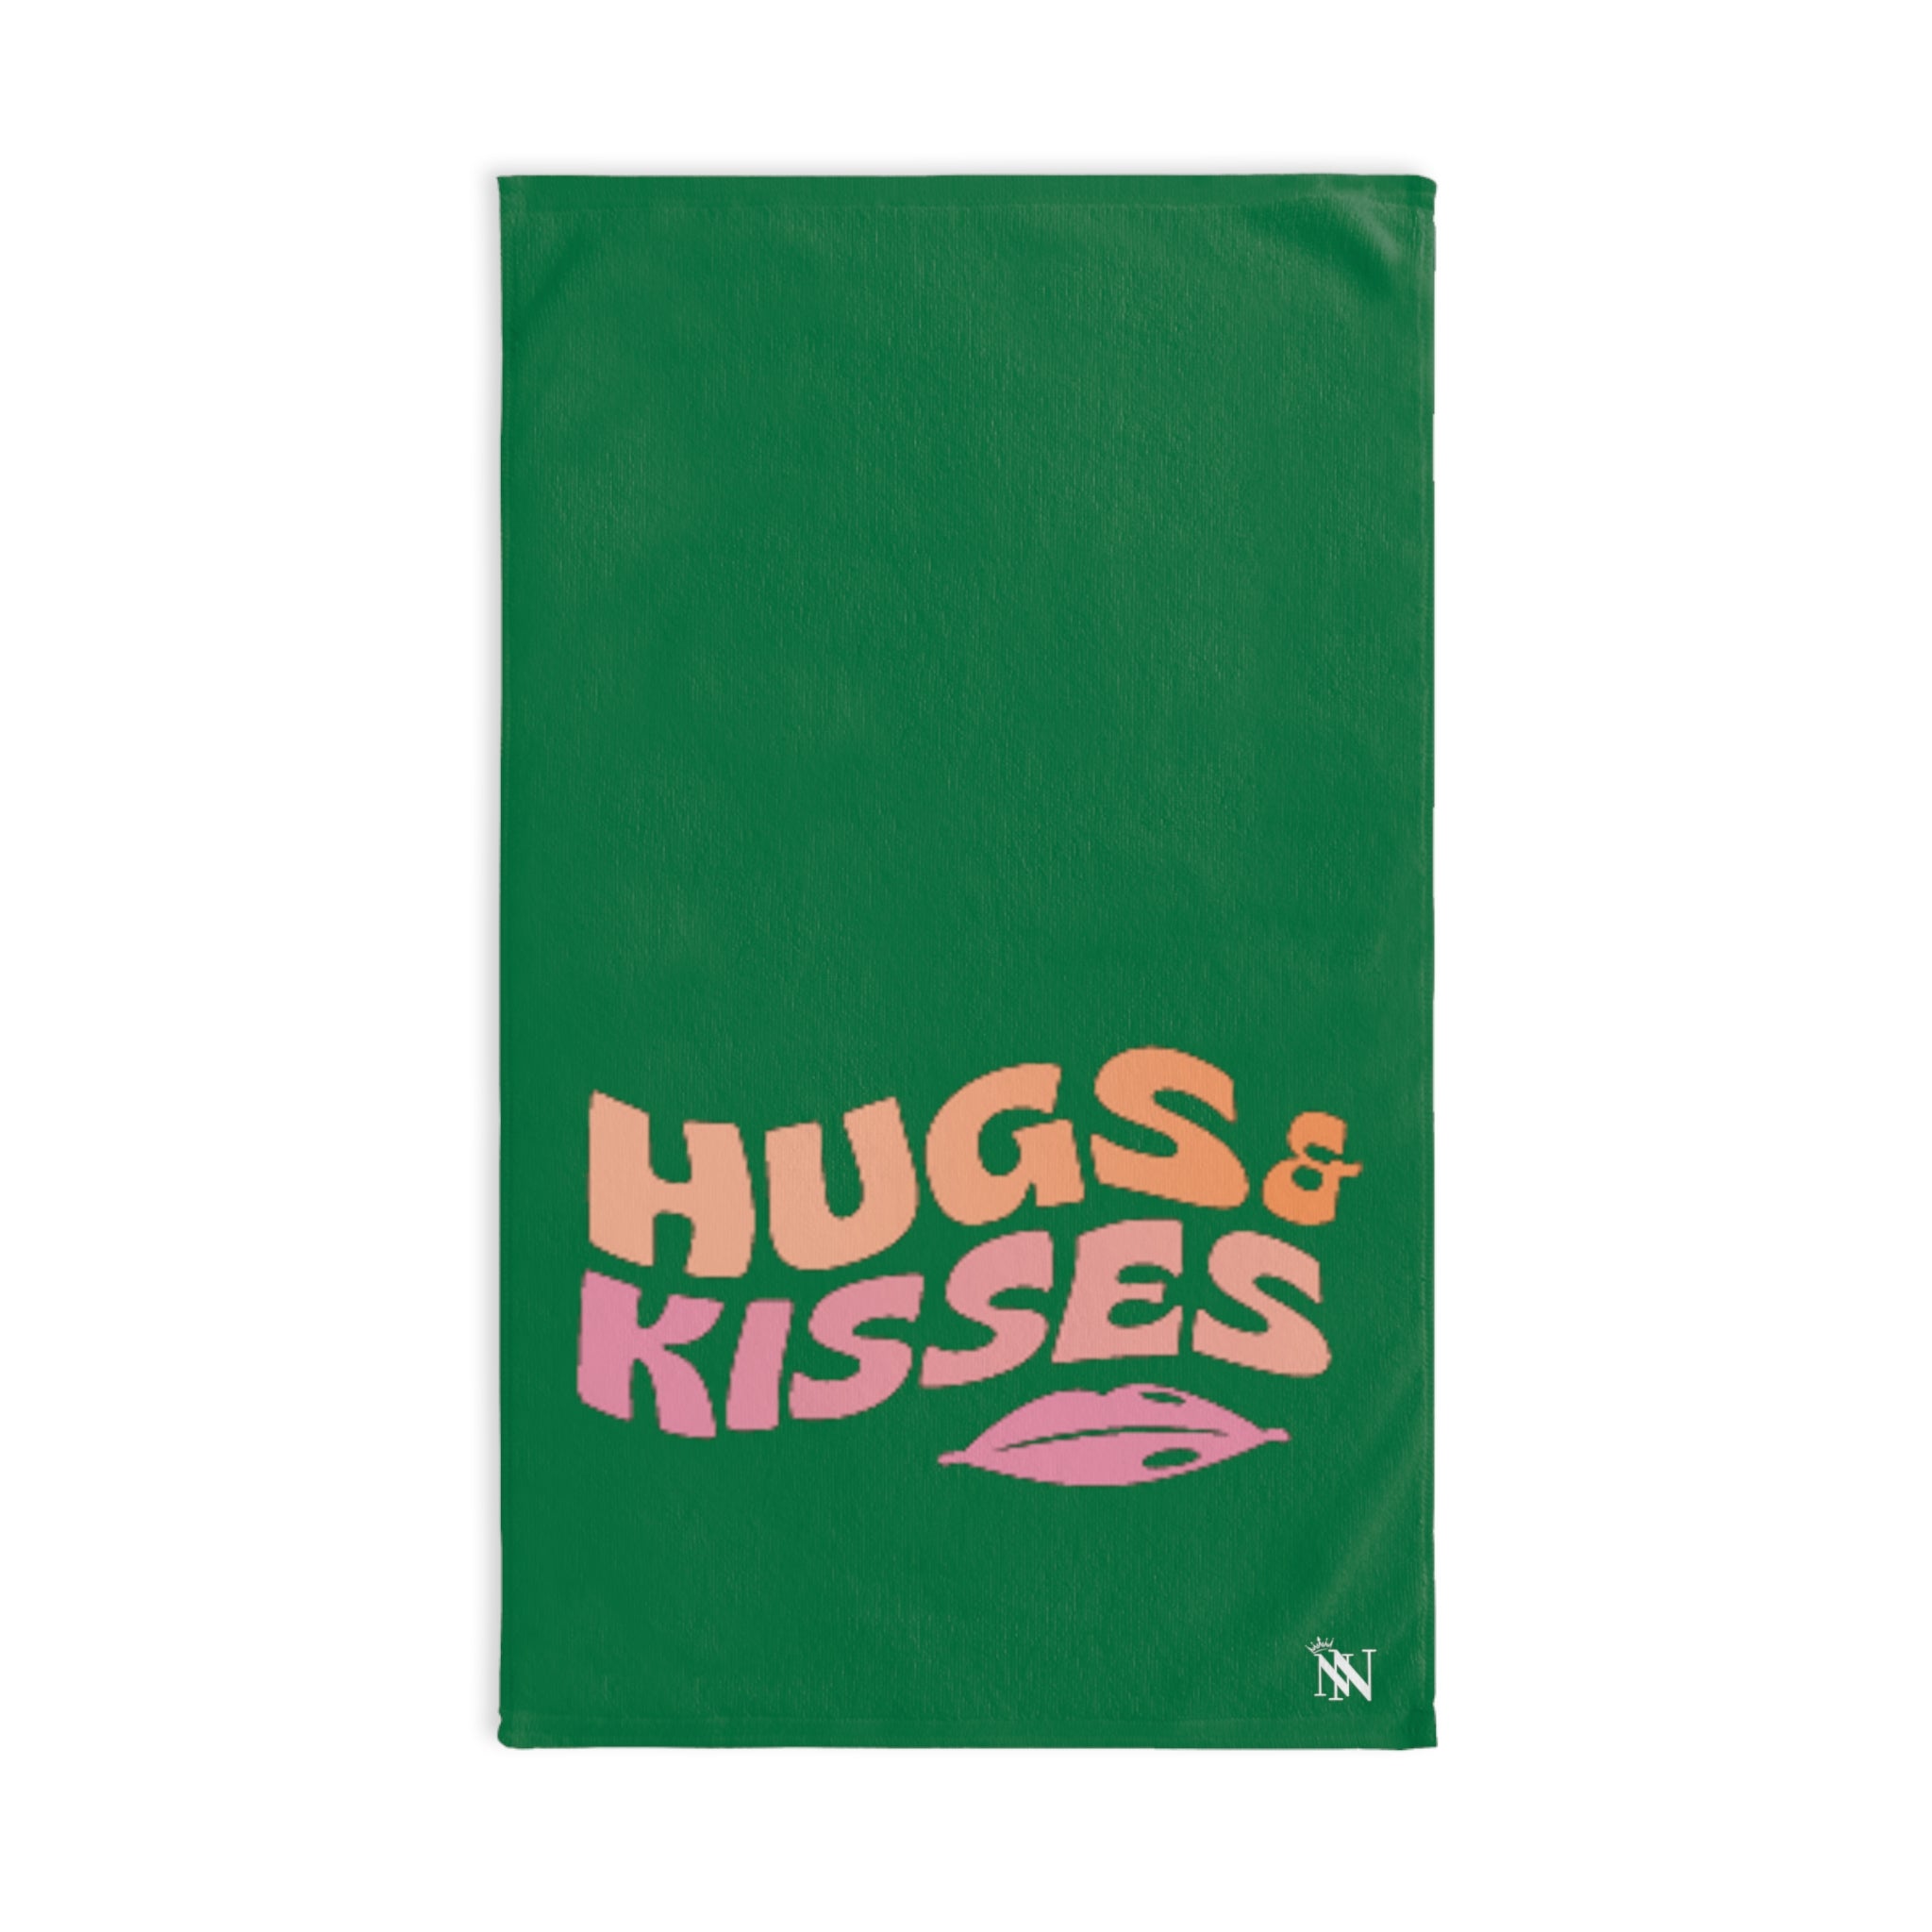 Hugs Kisses KissGreen | Anniversary Wedding, Christmas, Valentines Day, Birthday Gifts for Him, Her, Romantic Gifts for Wife, Girlfriend, Couples Gifts for Boyfriend, Husband NECTAR NAPKINS